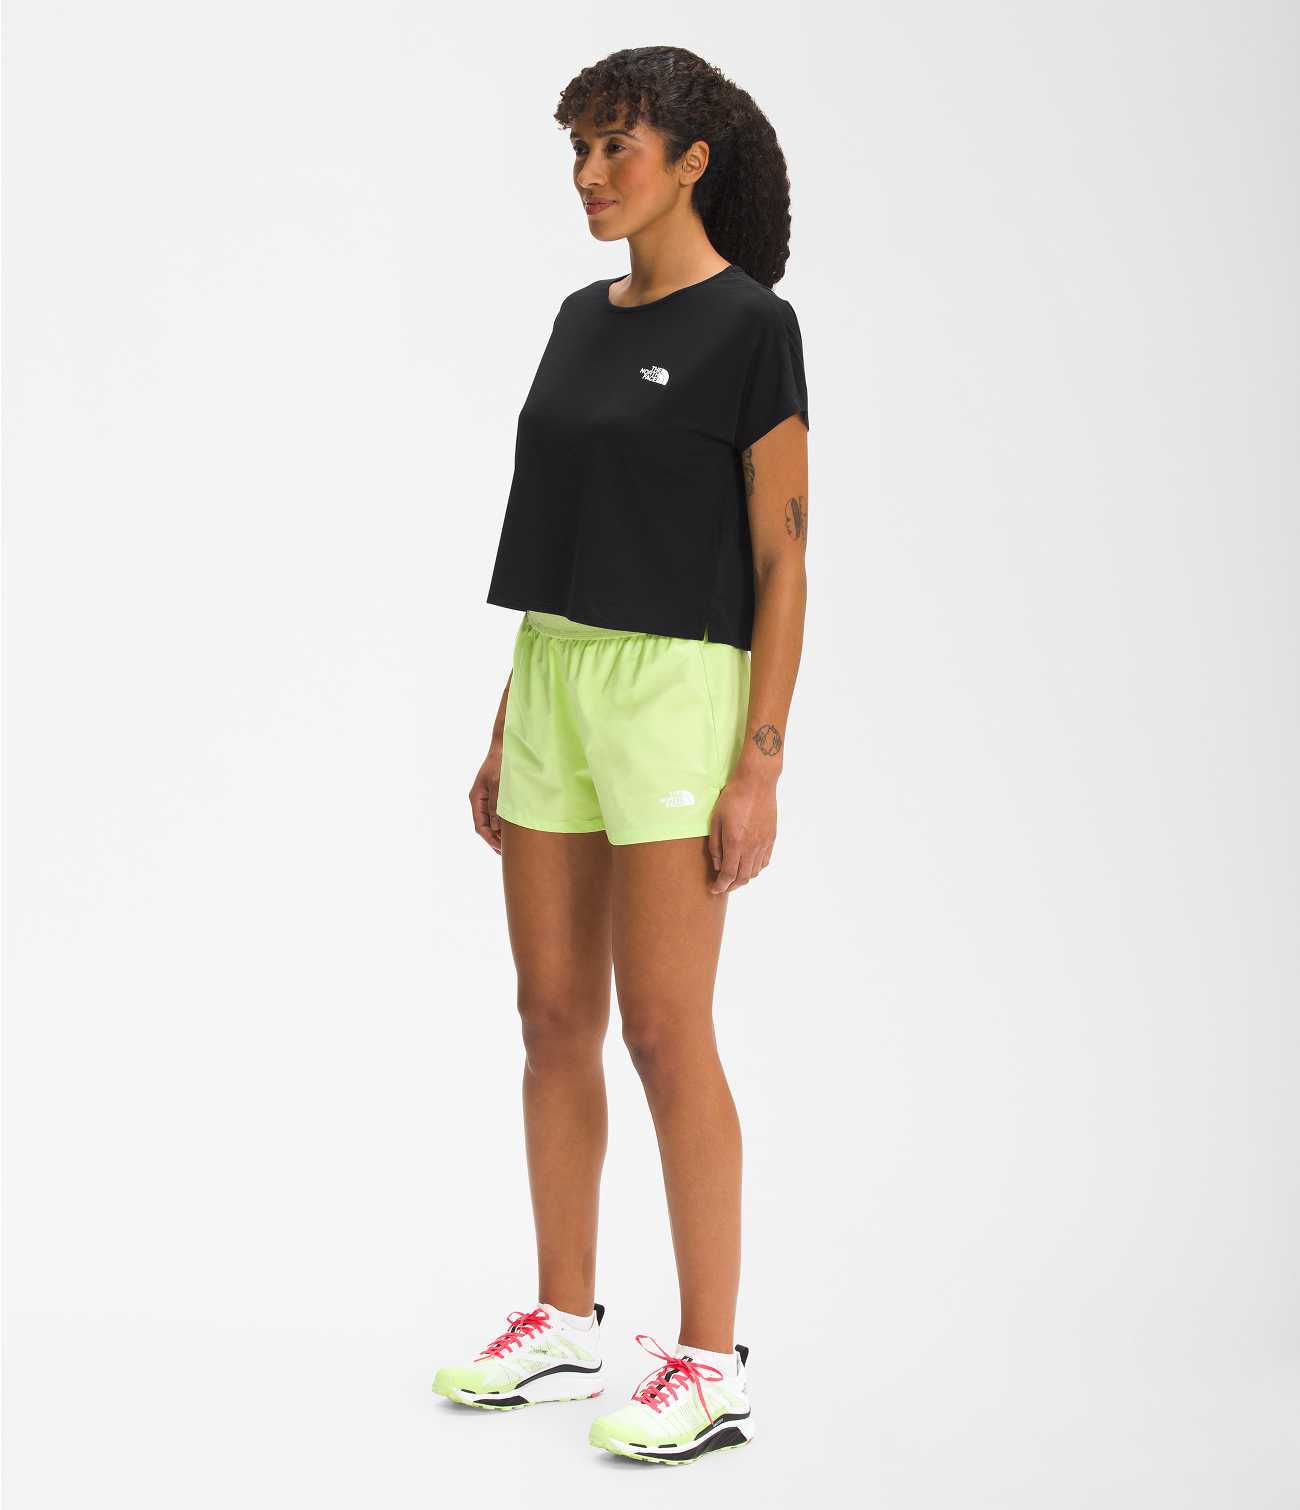 WOMEN'S WANDER CROSSBACK S/S | The North Face | The North Face Renewed